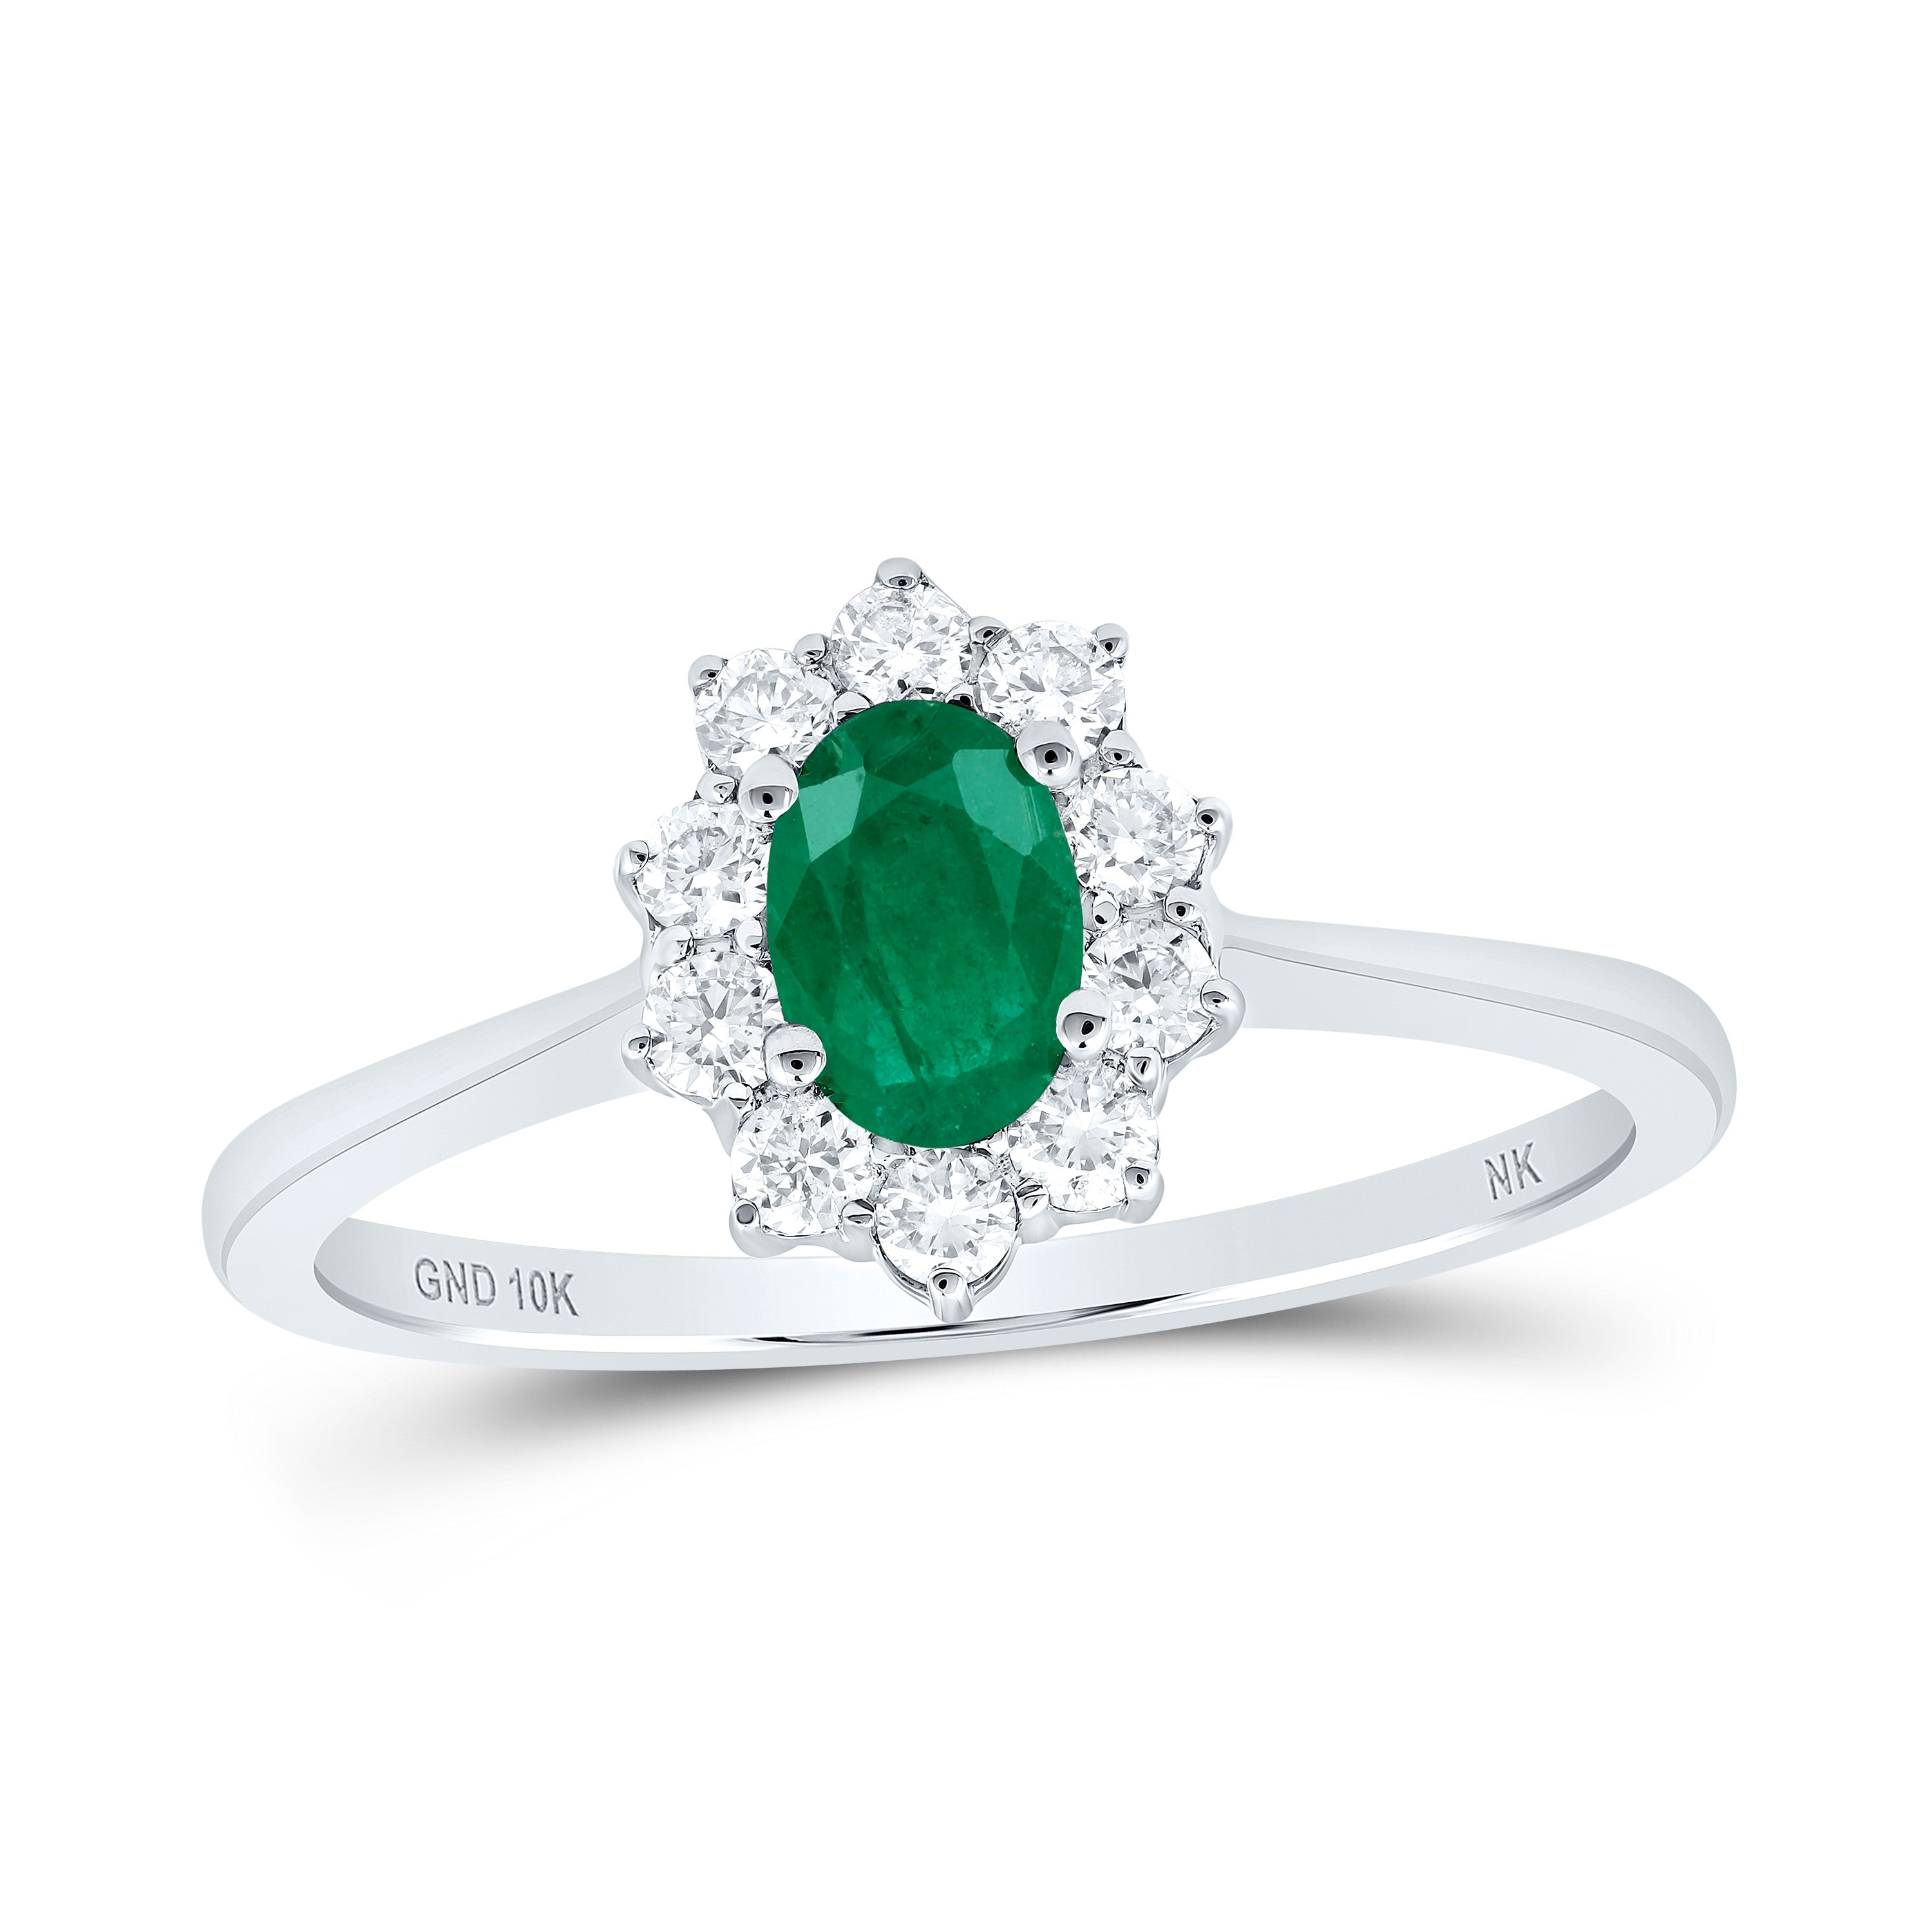 10kt White Gold Womens Oval Emerald Diamond Halo Ring 7/8 Cttw